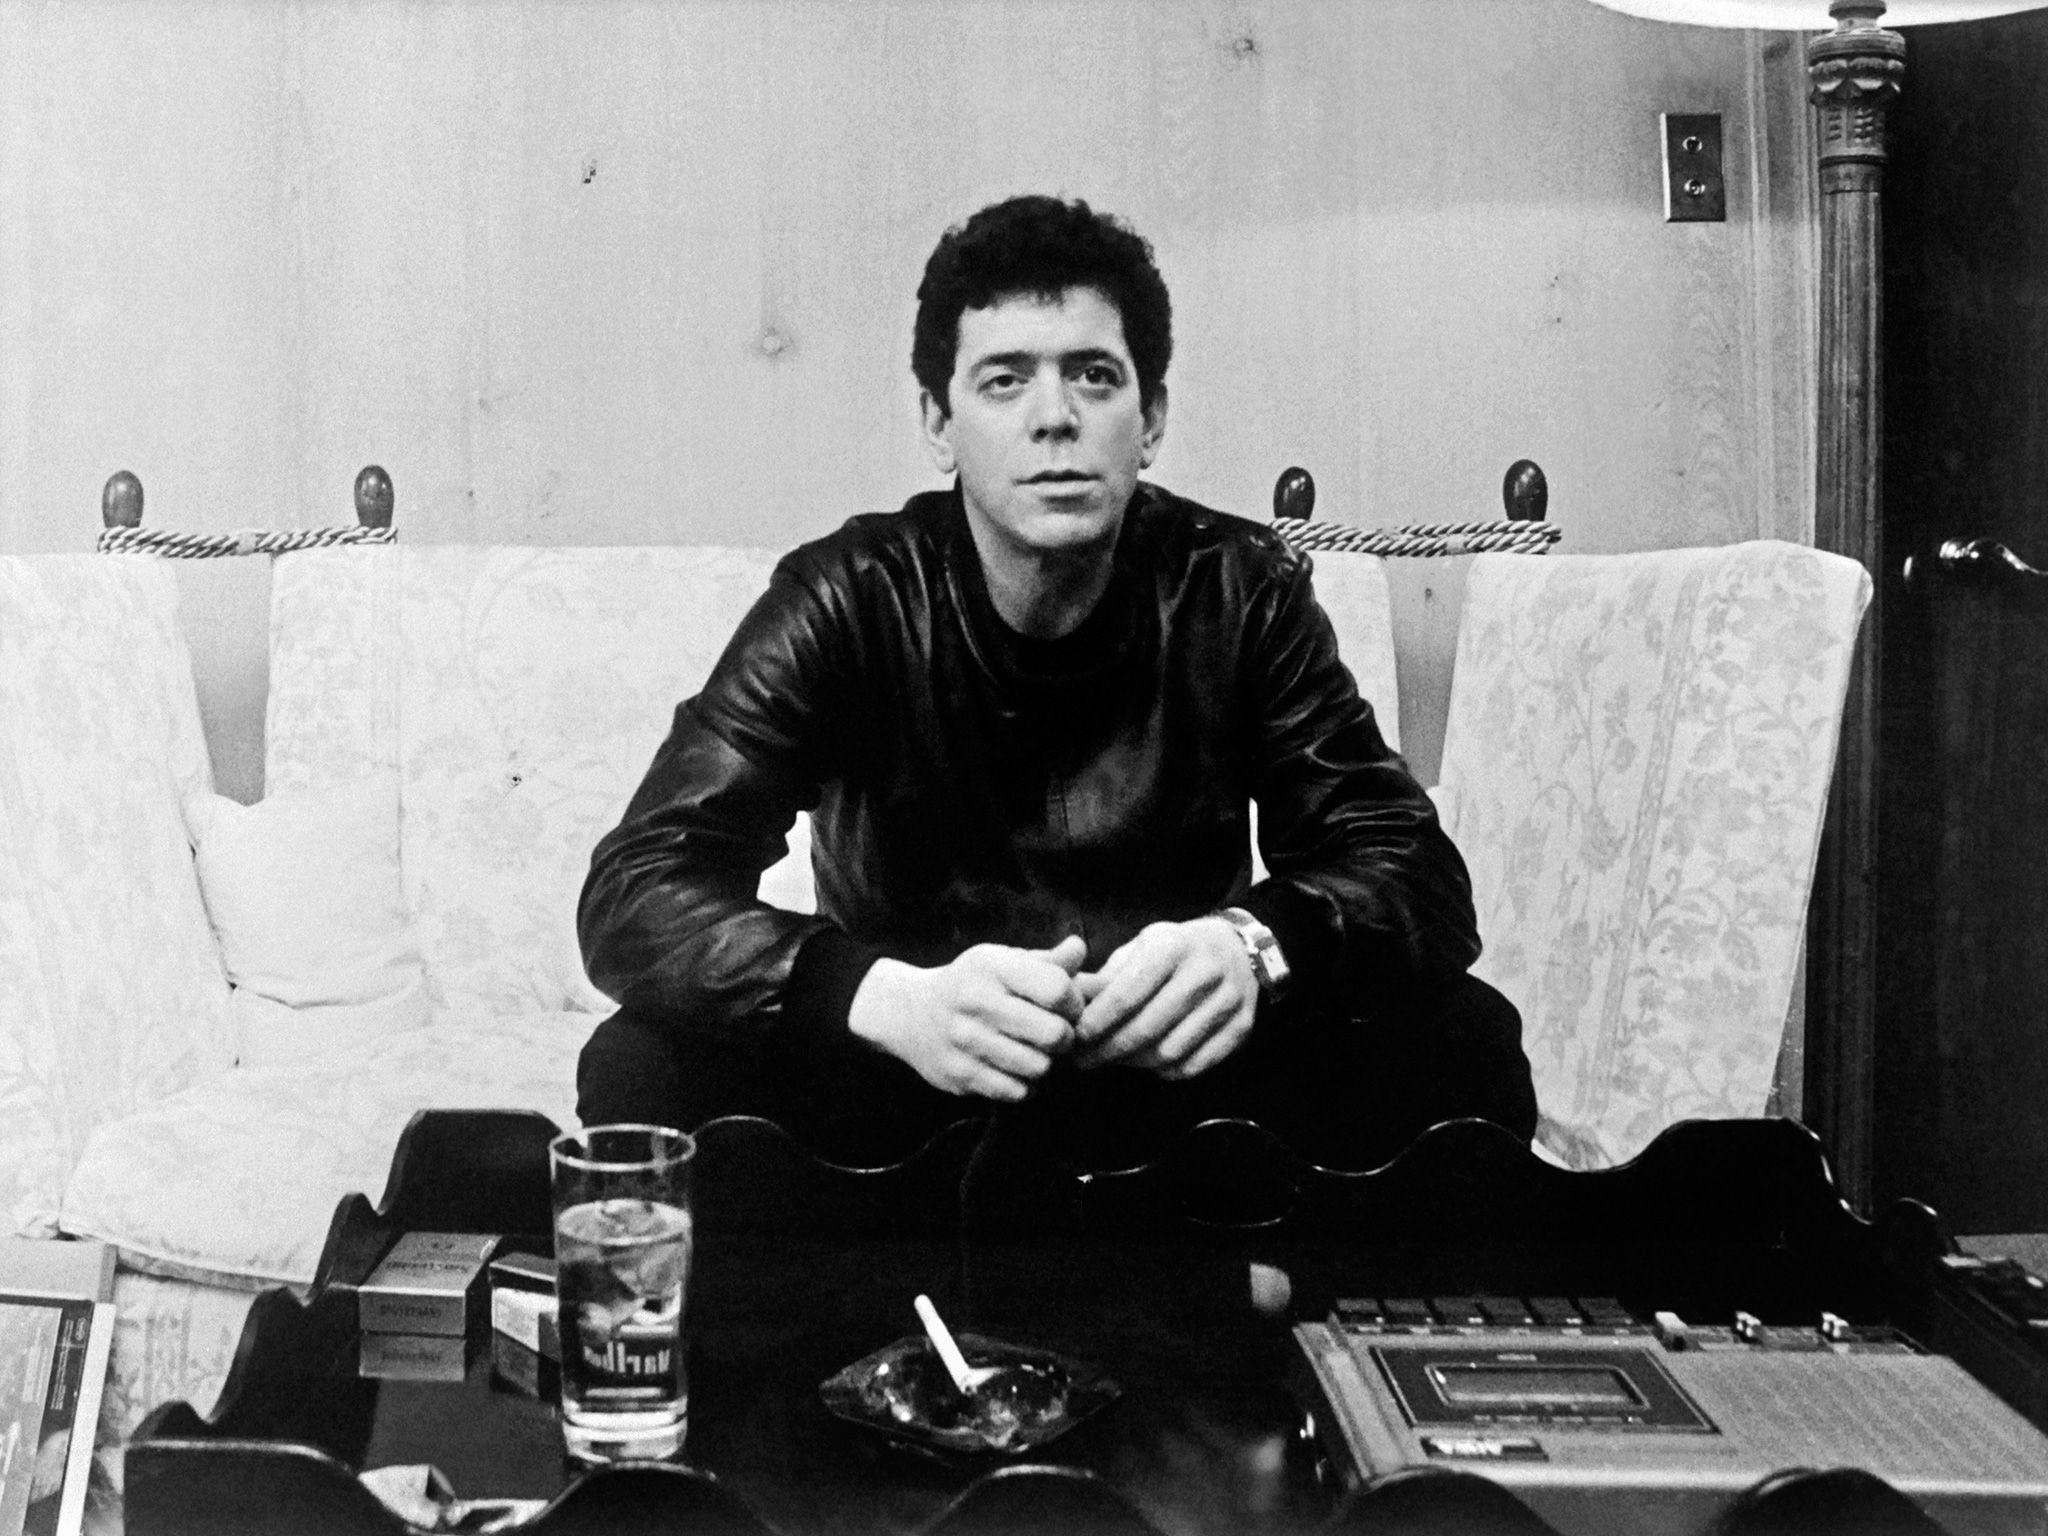 No, Lou Reed's 'Walk on the Wild Side' is not transphobic